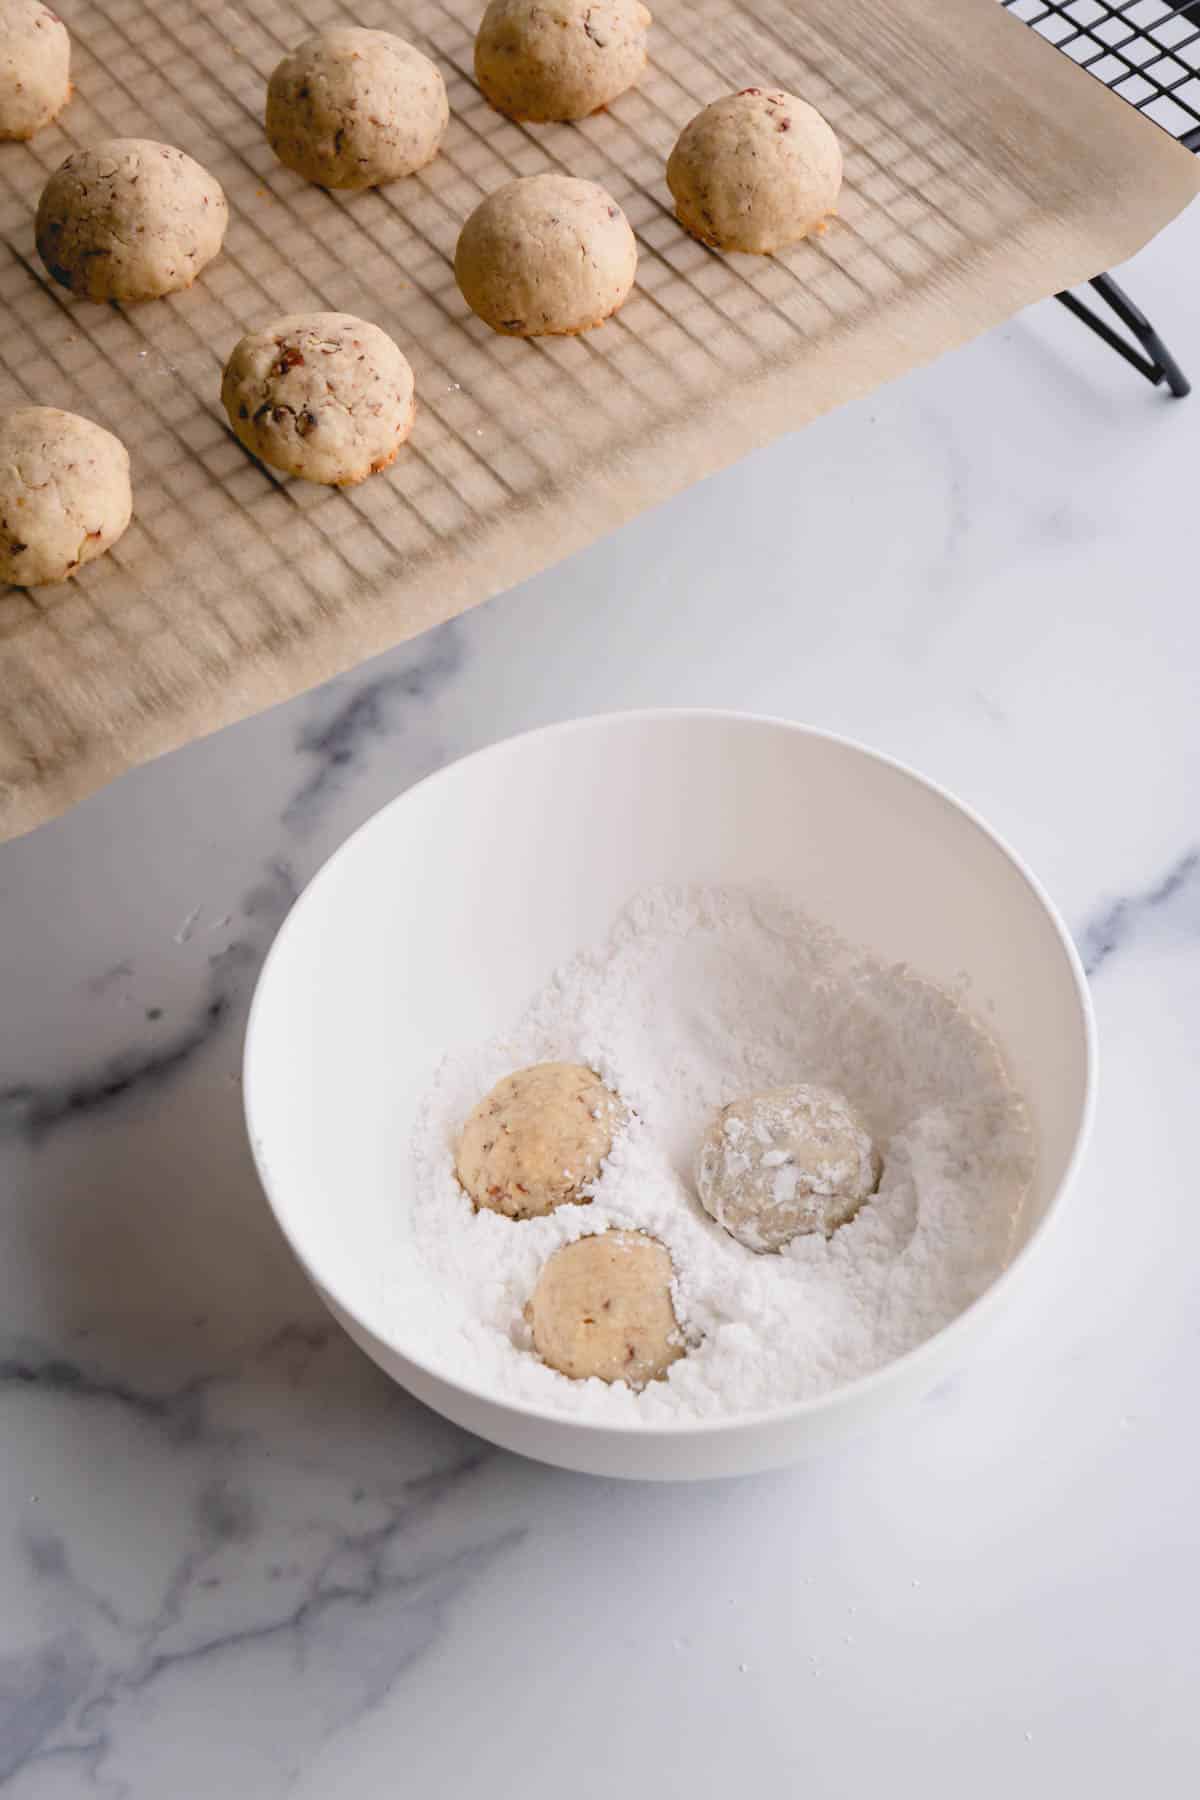 snow ball cookies dropped in a bowl of powdered sugar.